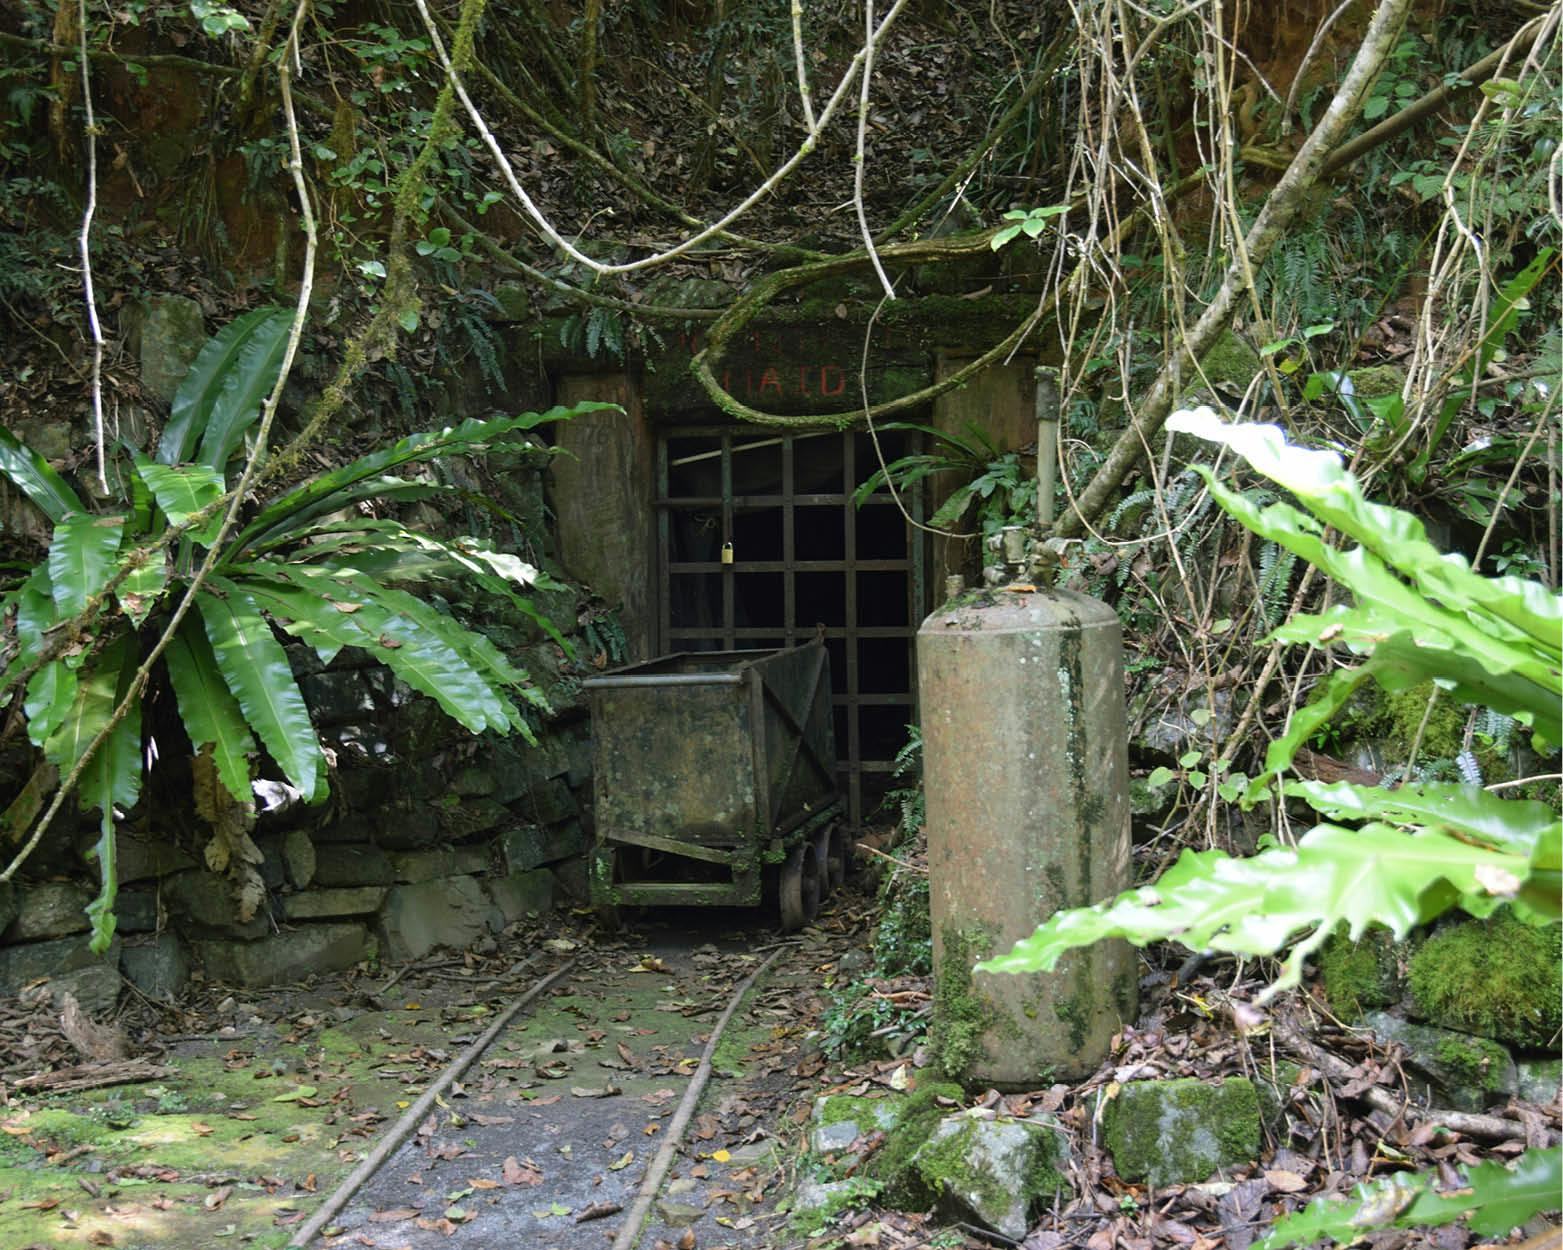 Book a guided tour of the Mountain Maid Goldmine area during your stay at Copeland House